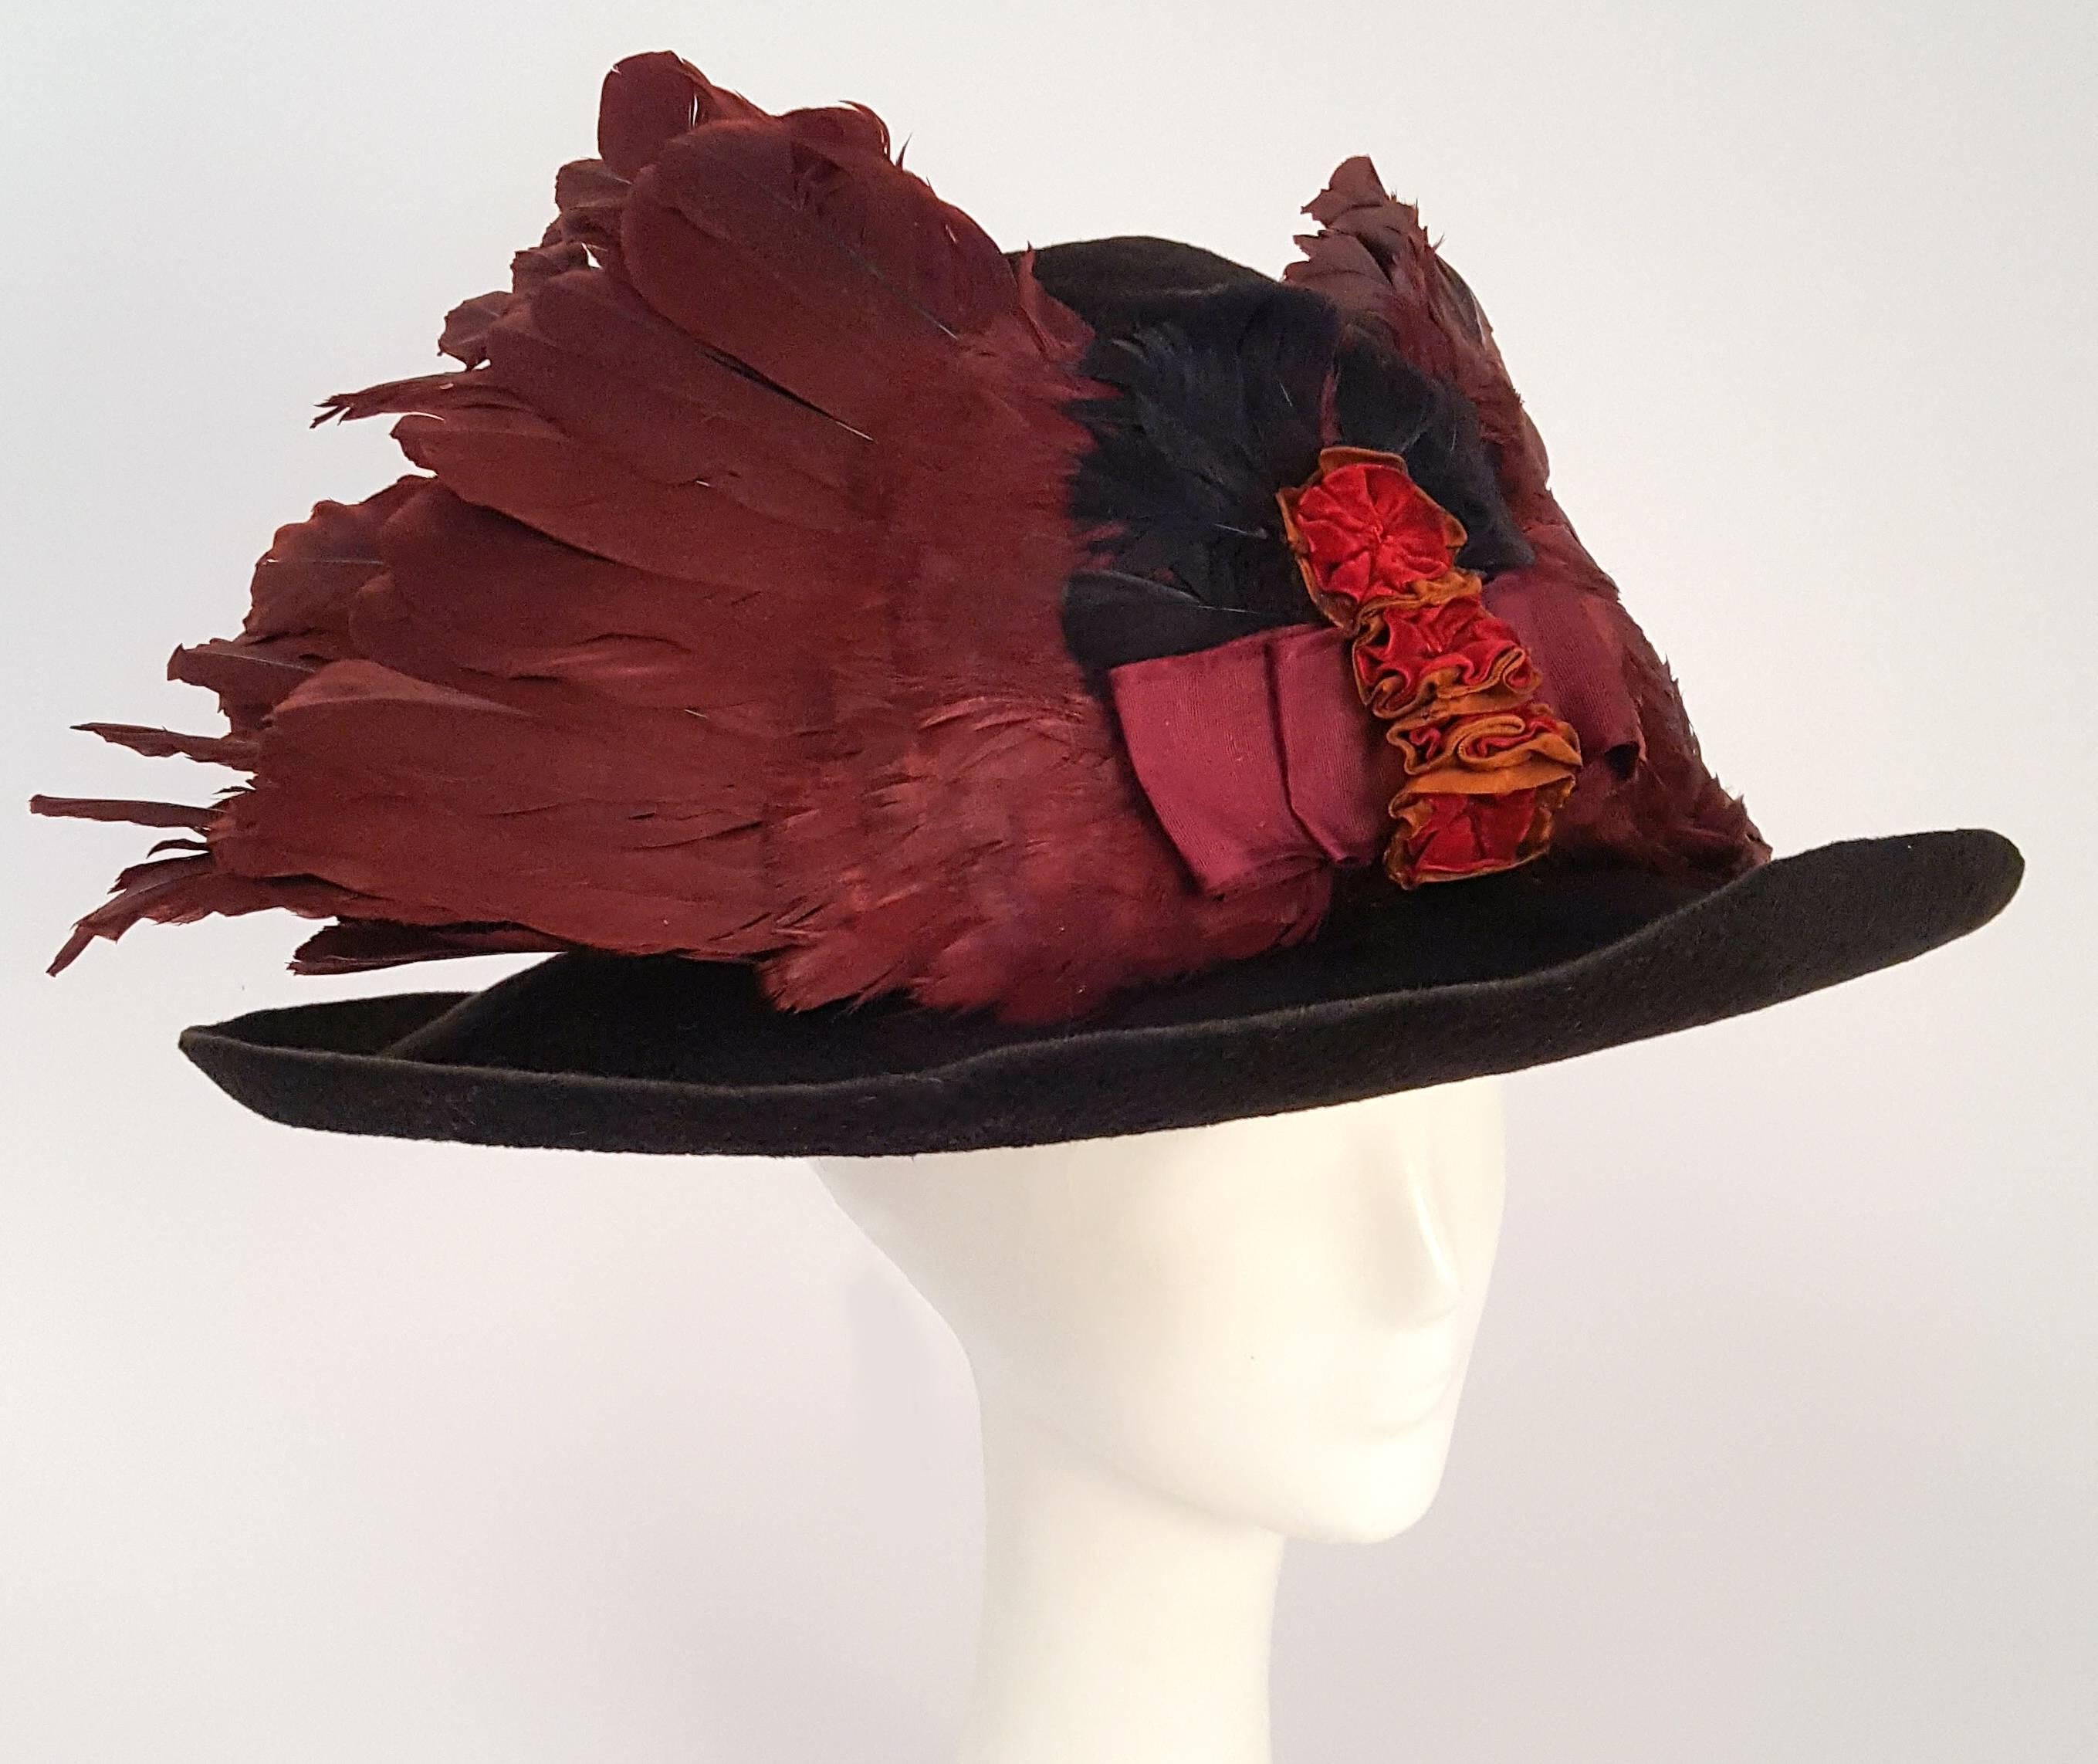 Edwardian Winged Picture Hat. Fully feathered 1910s wide brimmed picture hat with ruffle band detail. Adjustable inner hat band.